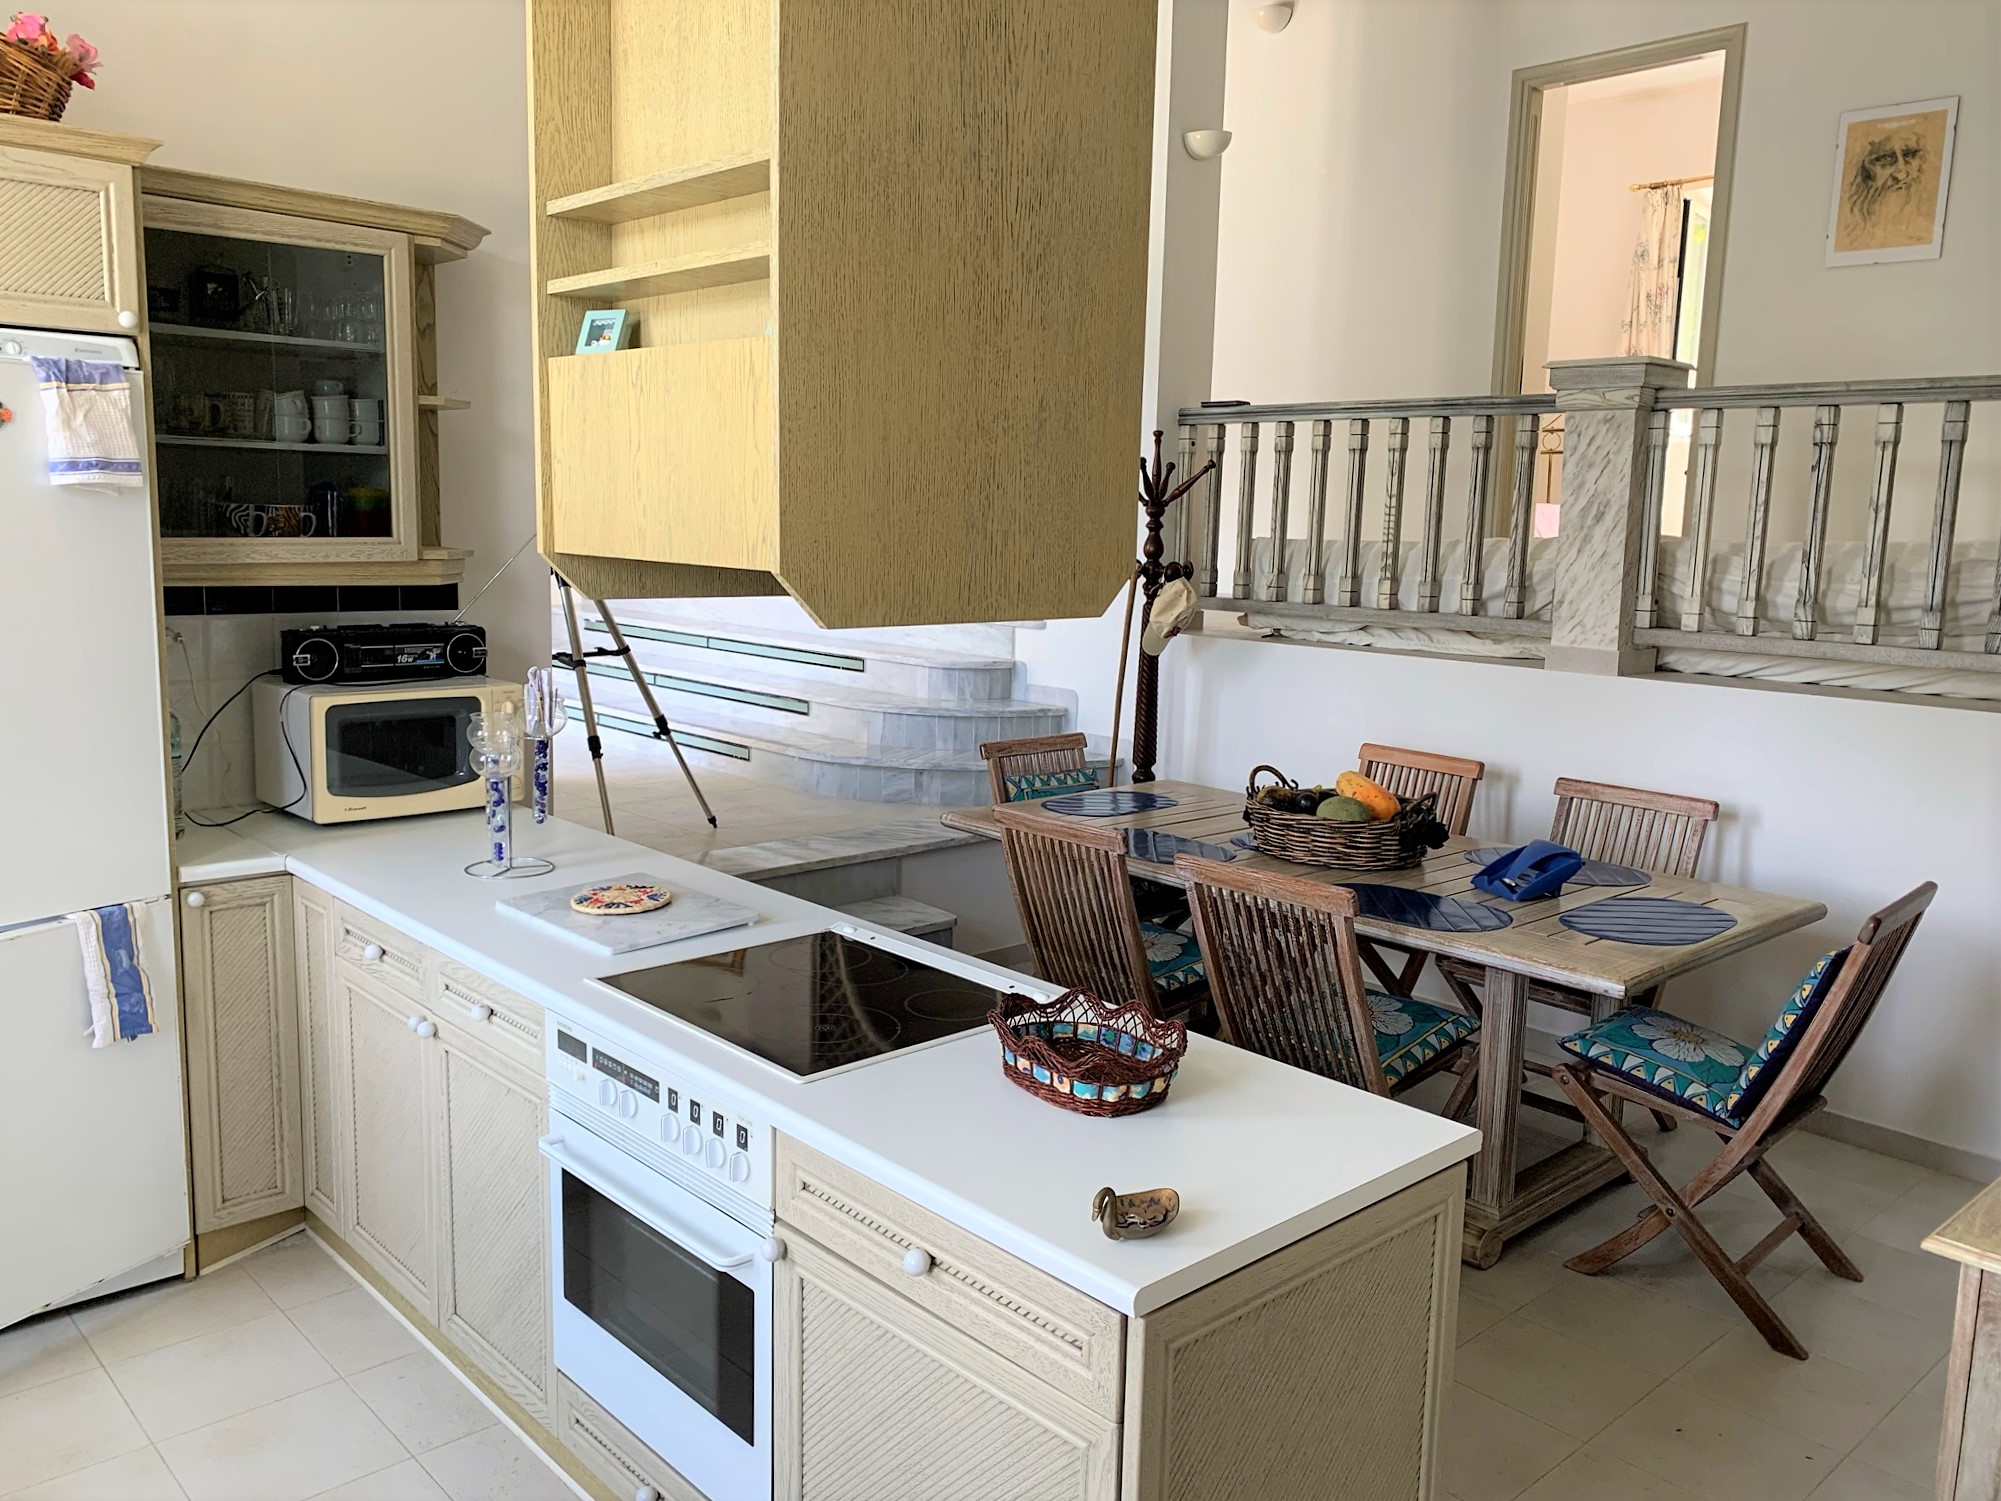 Kitchen of house for rent on Ithaca Greece, Brosta Aetos